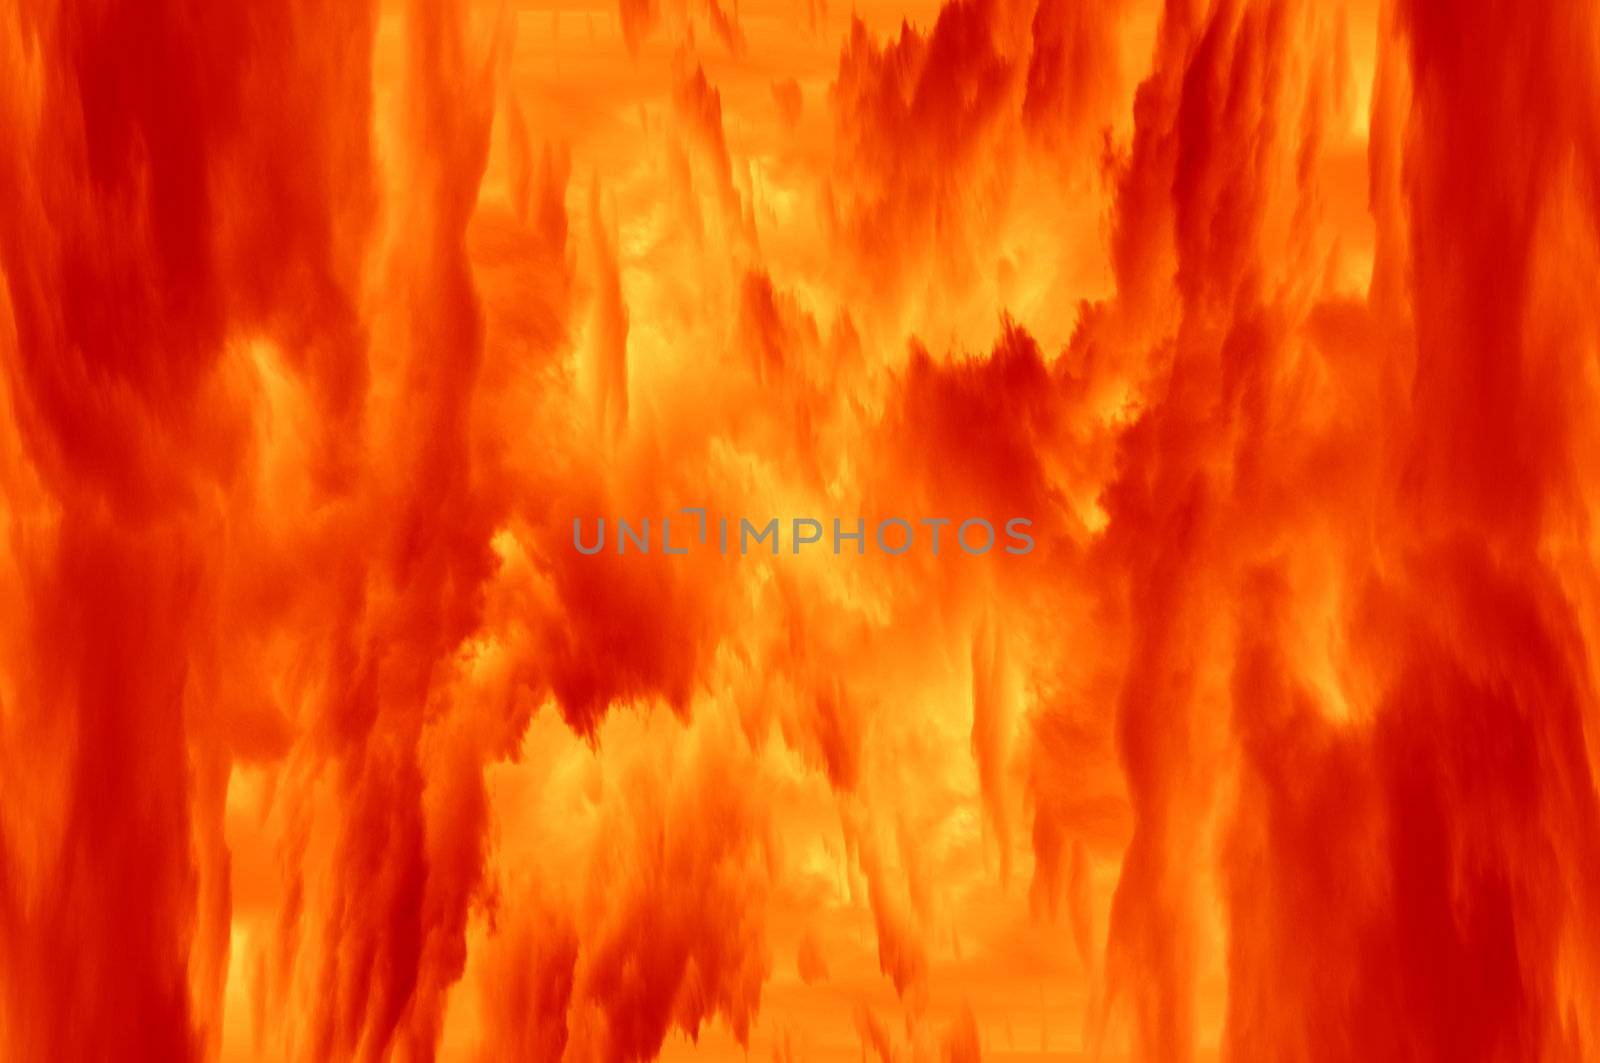 Abstract image of the fire and flame